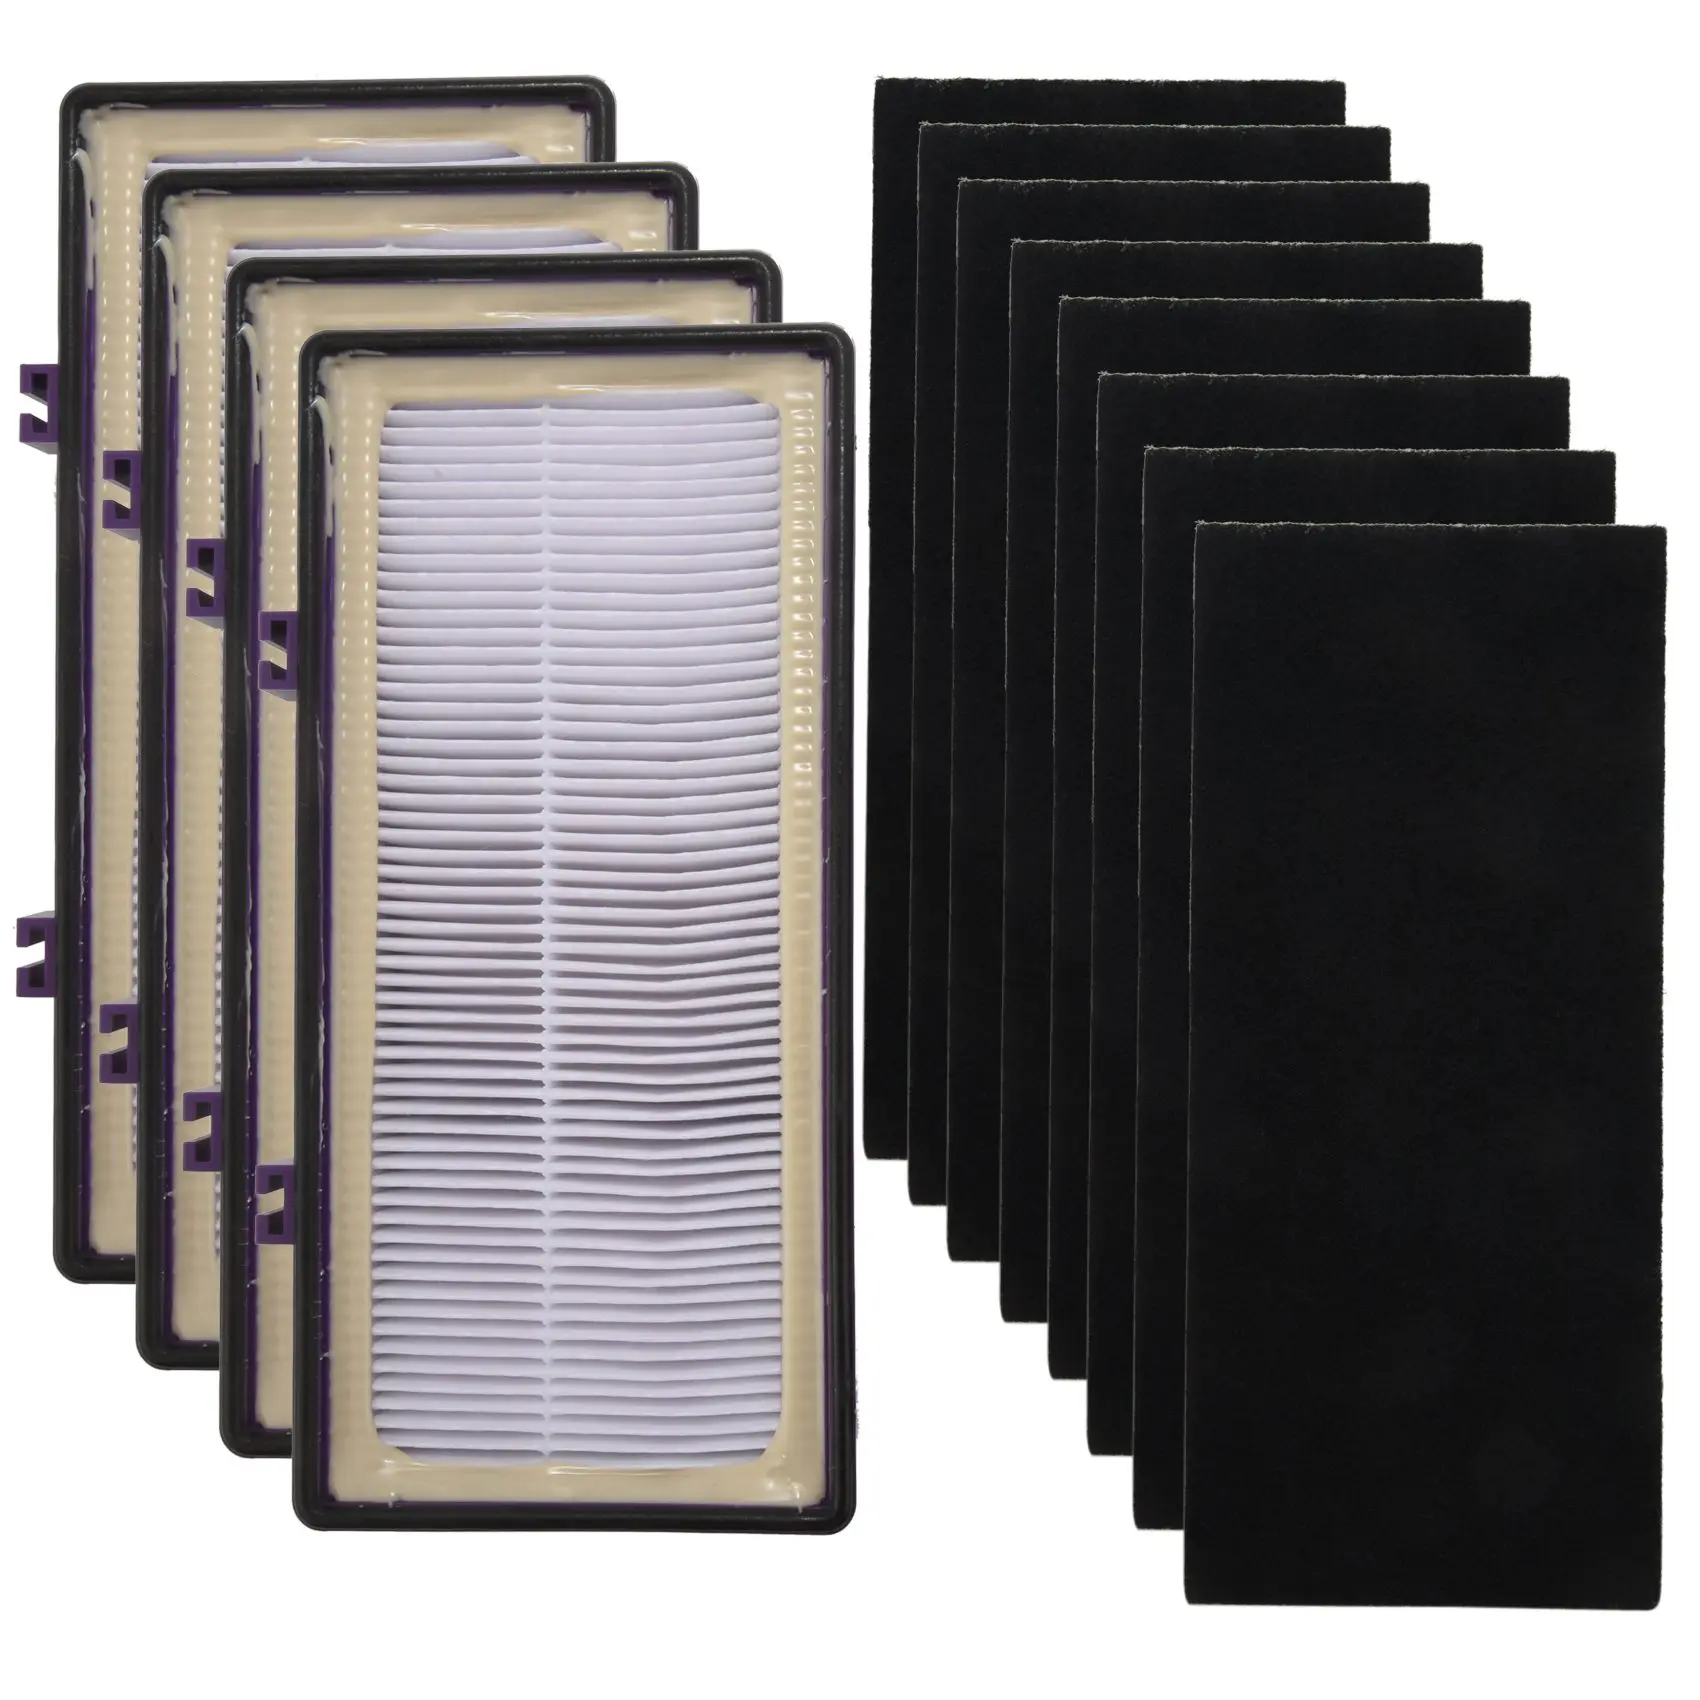 

True Filter Replacement for Holmes Aer1 Series Total Air Filter, Replacement Parts HAPF300,HAP30,HAPF300AP-U4